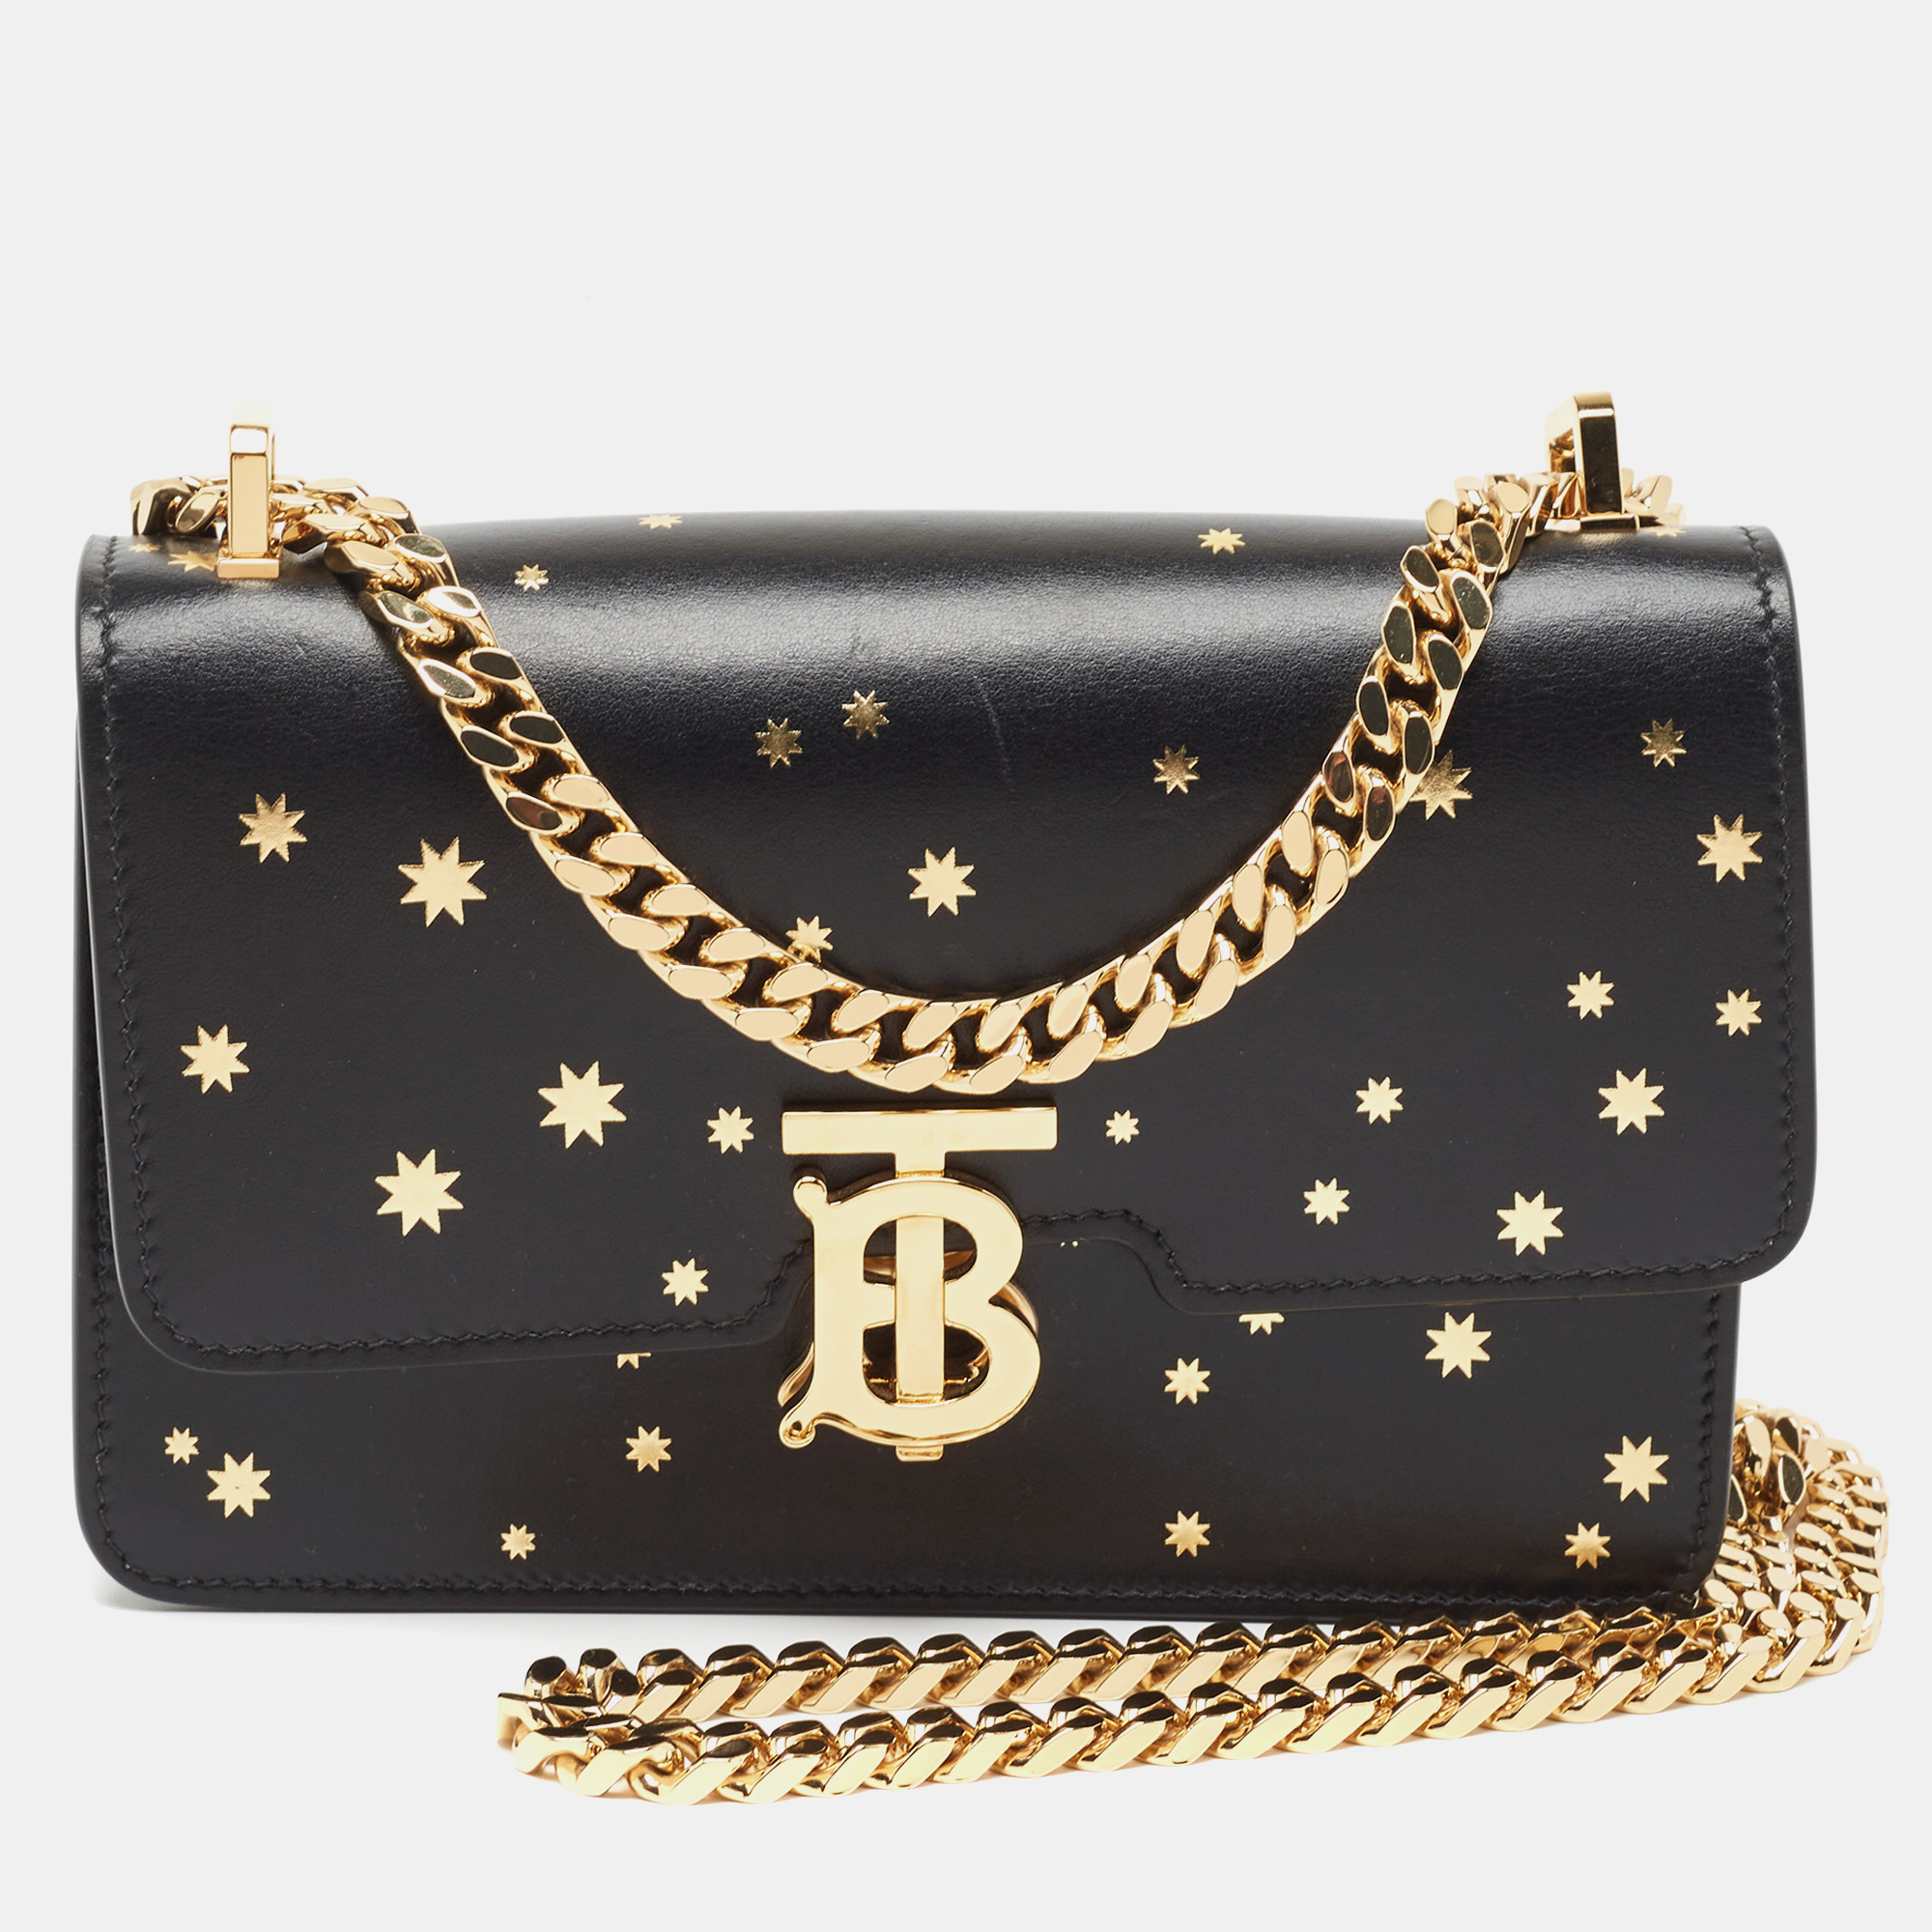 Pre-owned Burberry Black Leather Tb Elongated Chain Bag